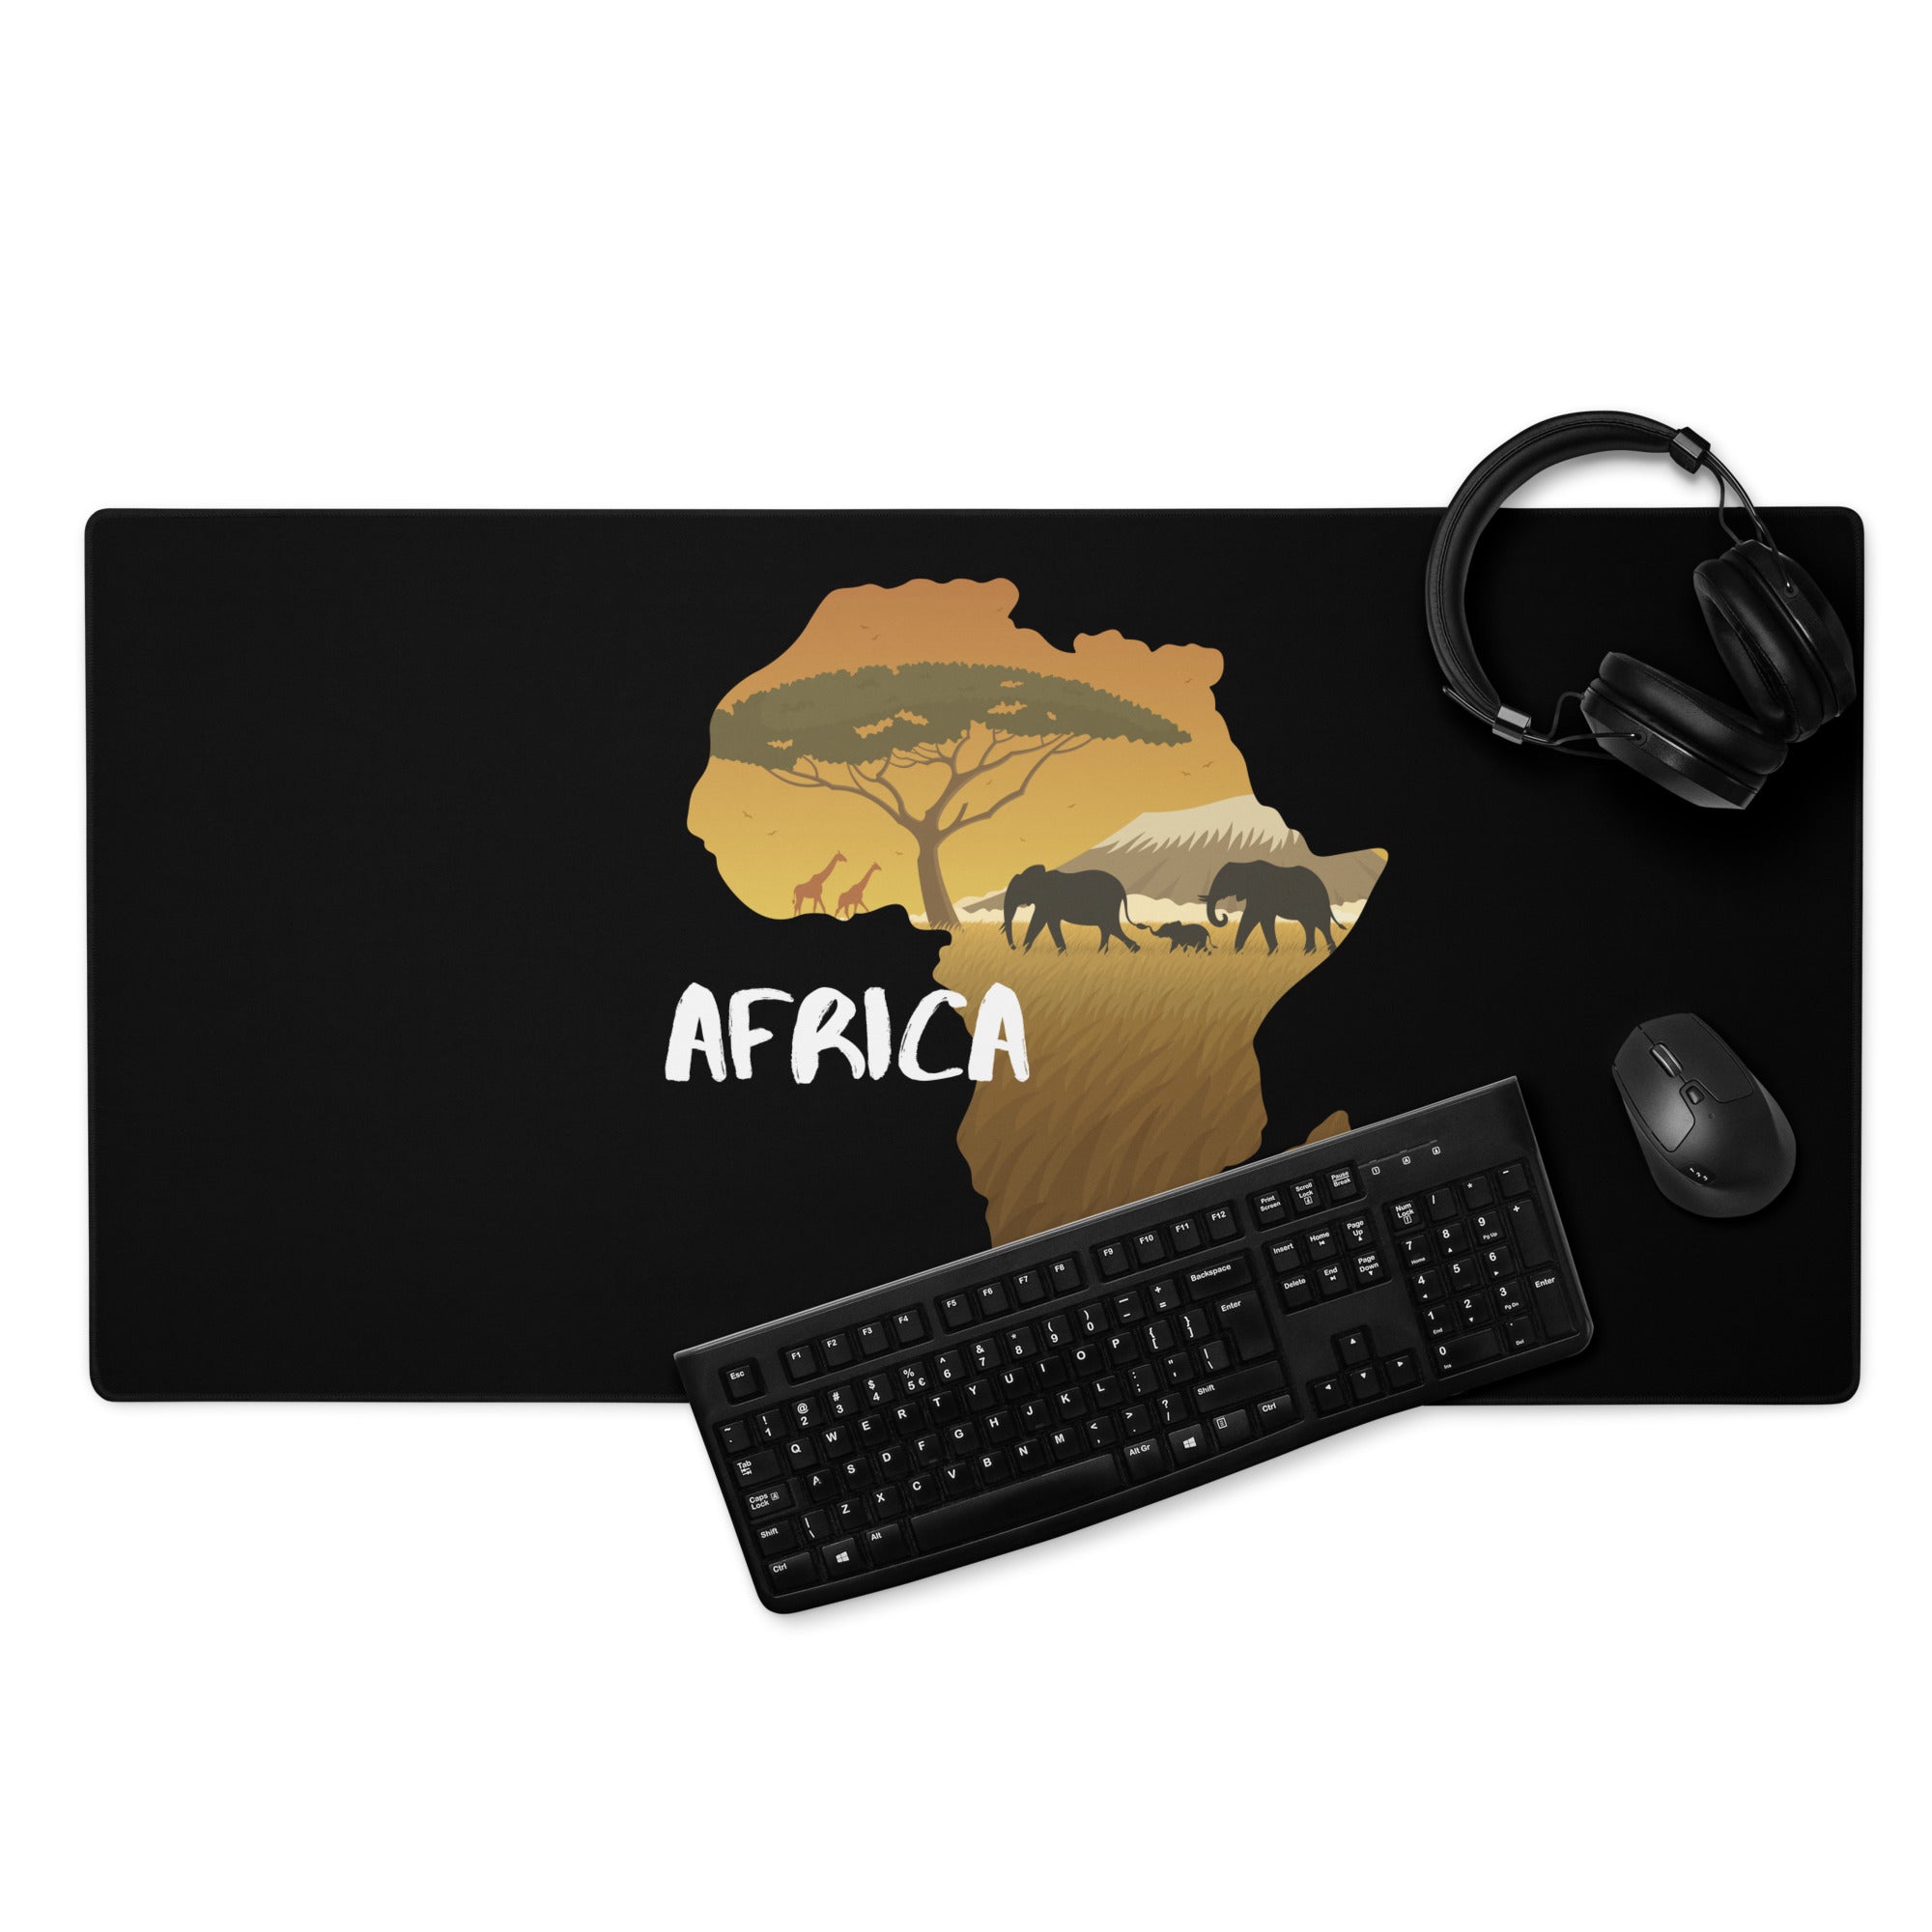 African Continent Gaming mouse pad Landscape Gaming Mouse Pad with RGB Led, Large Gaming Mouse Pad, Extended Mouse Pad for Gamers